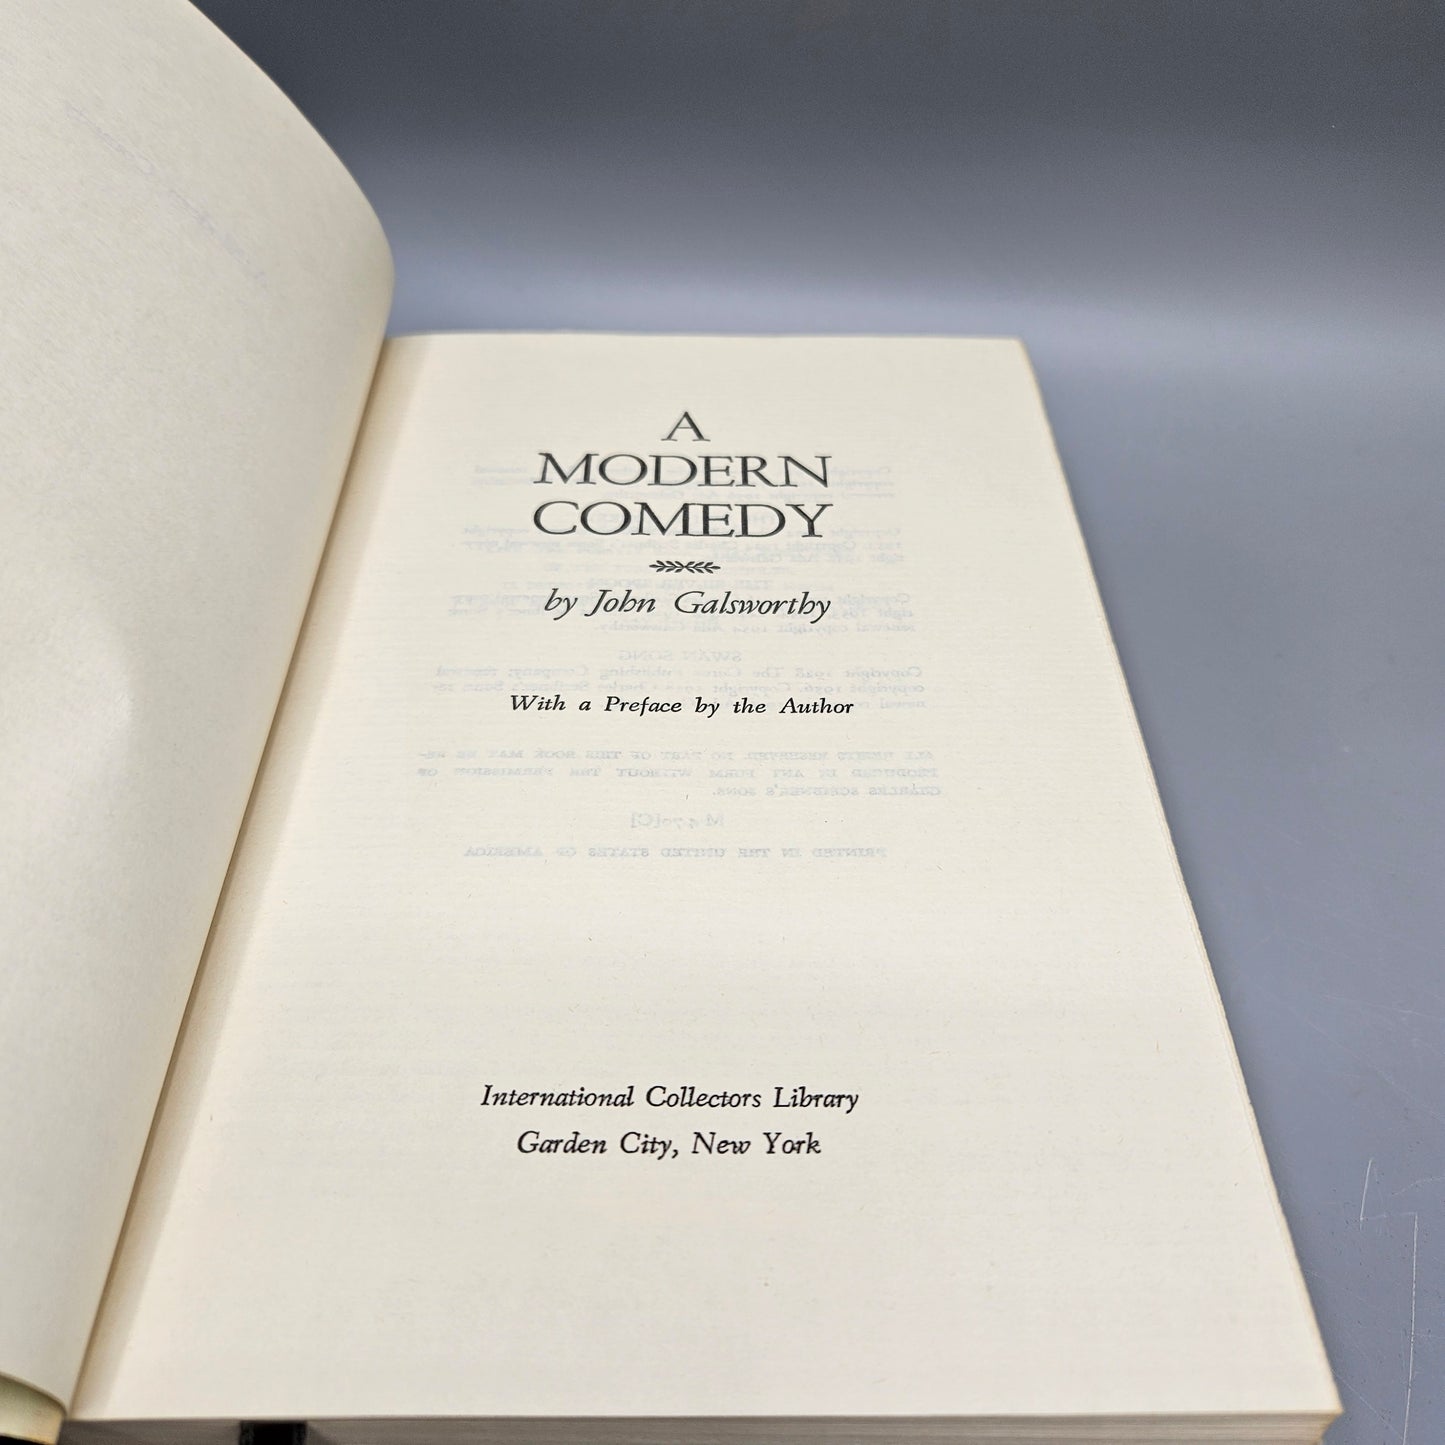 John Galsworthy "A Modern Comedy" International Collectors Library